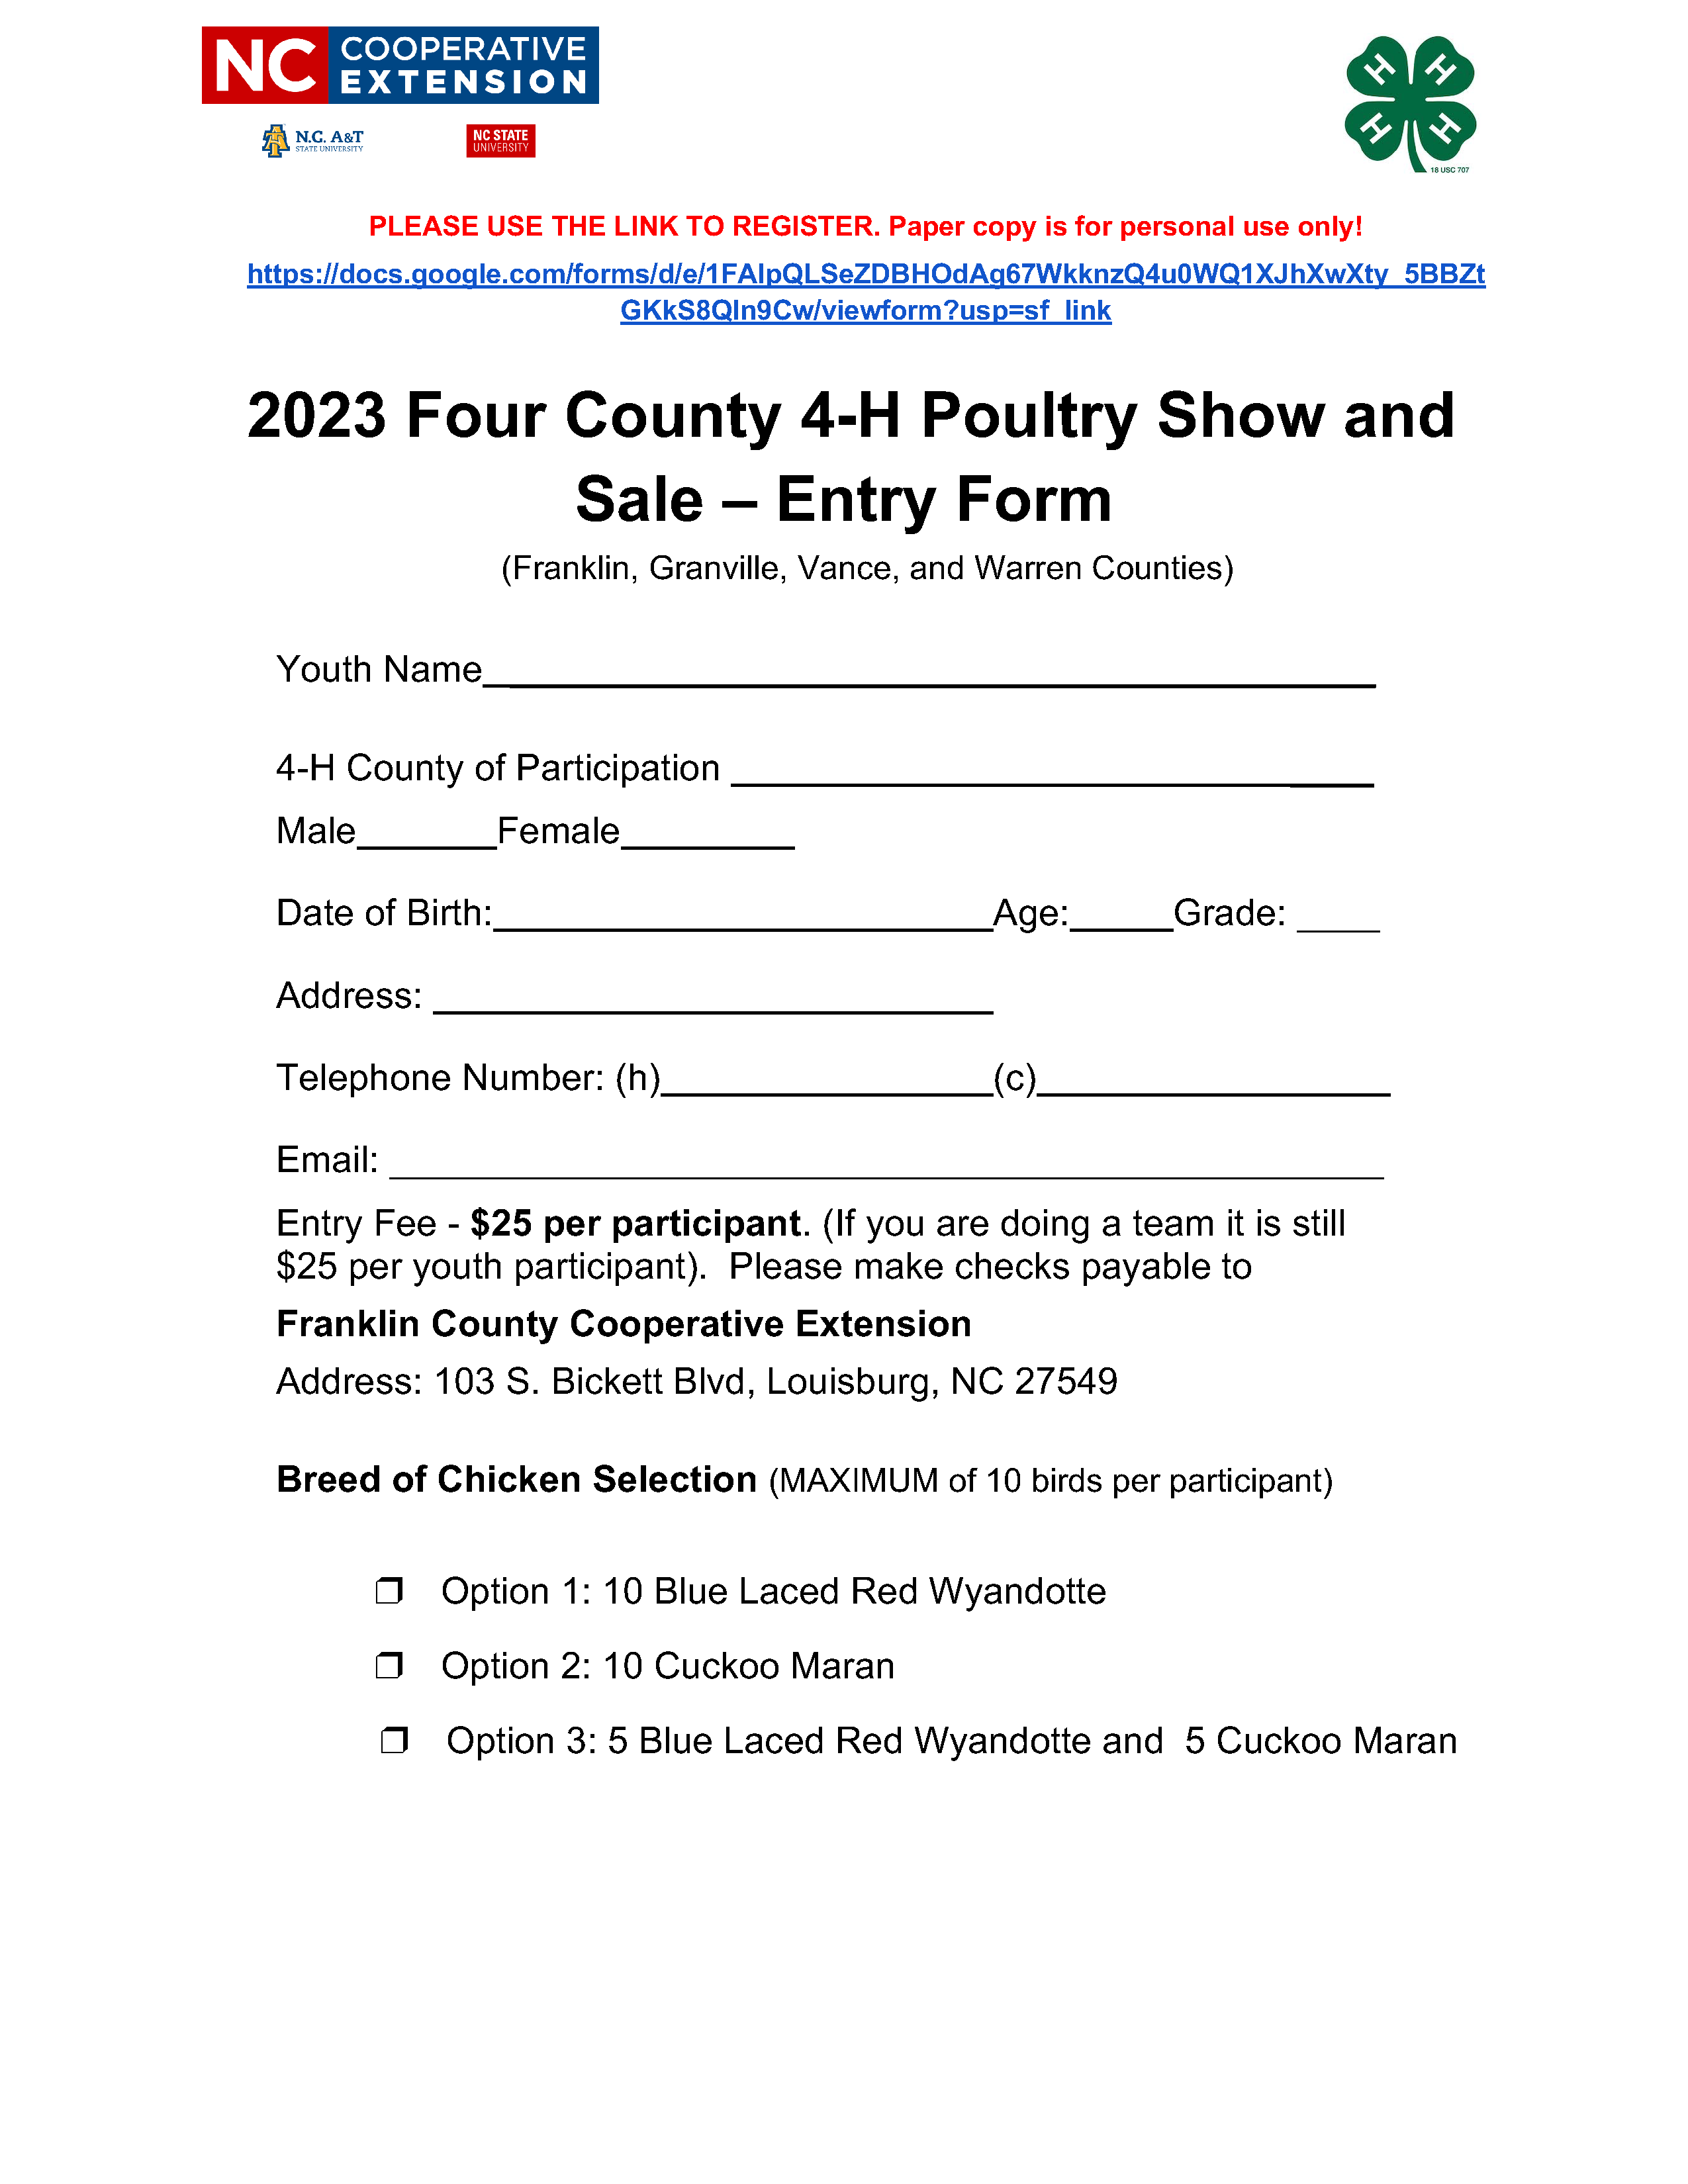 2023 Four County 4-H Poultry Show and Sale_Page_1